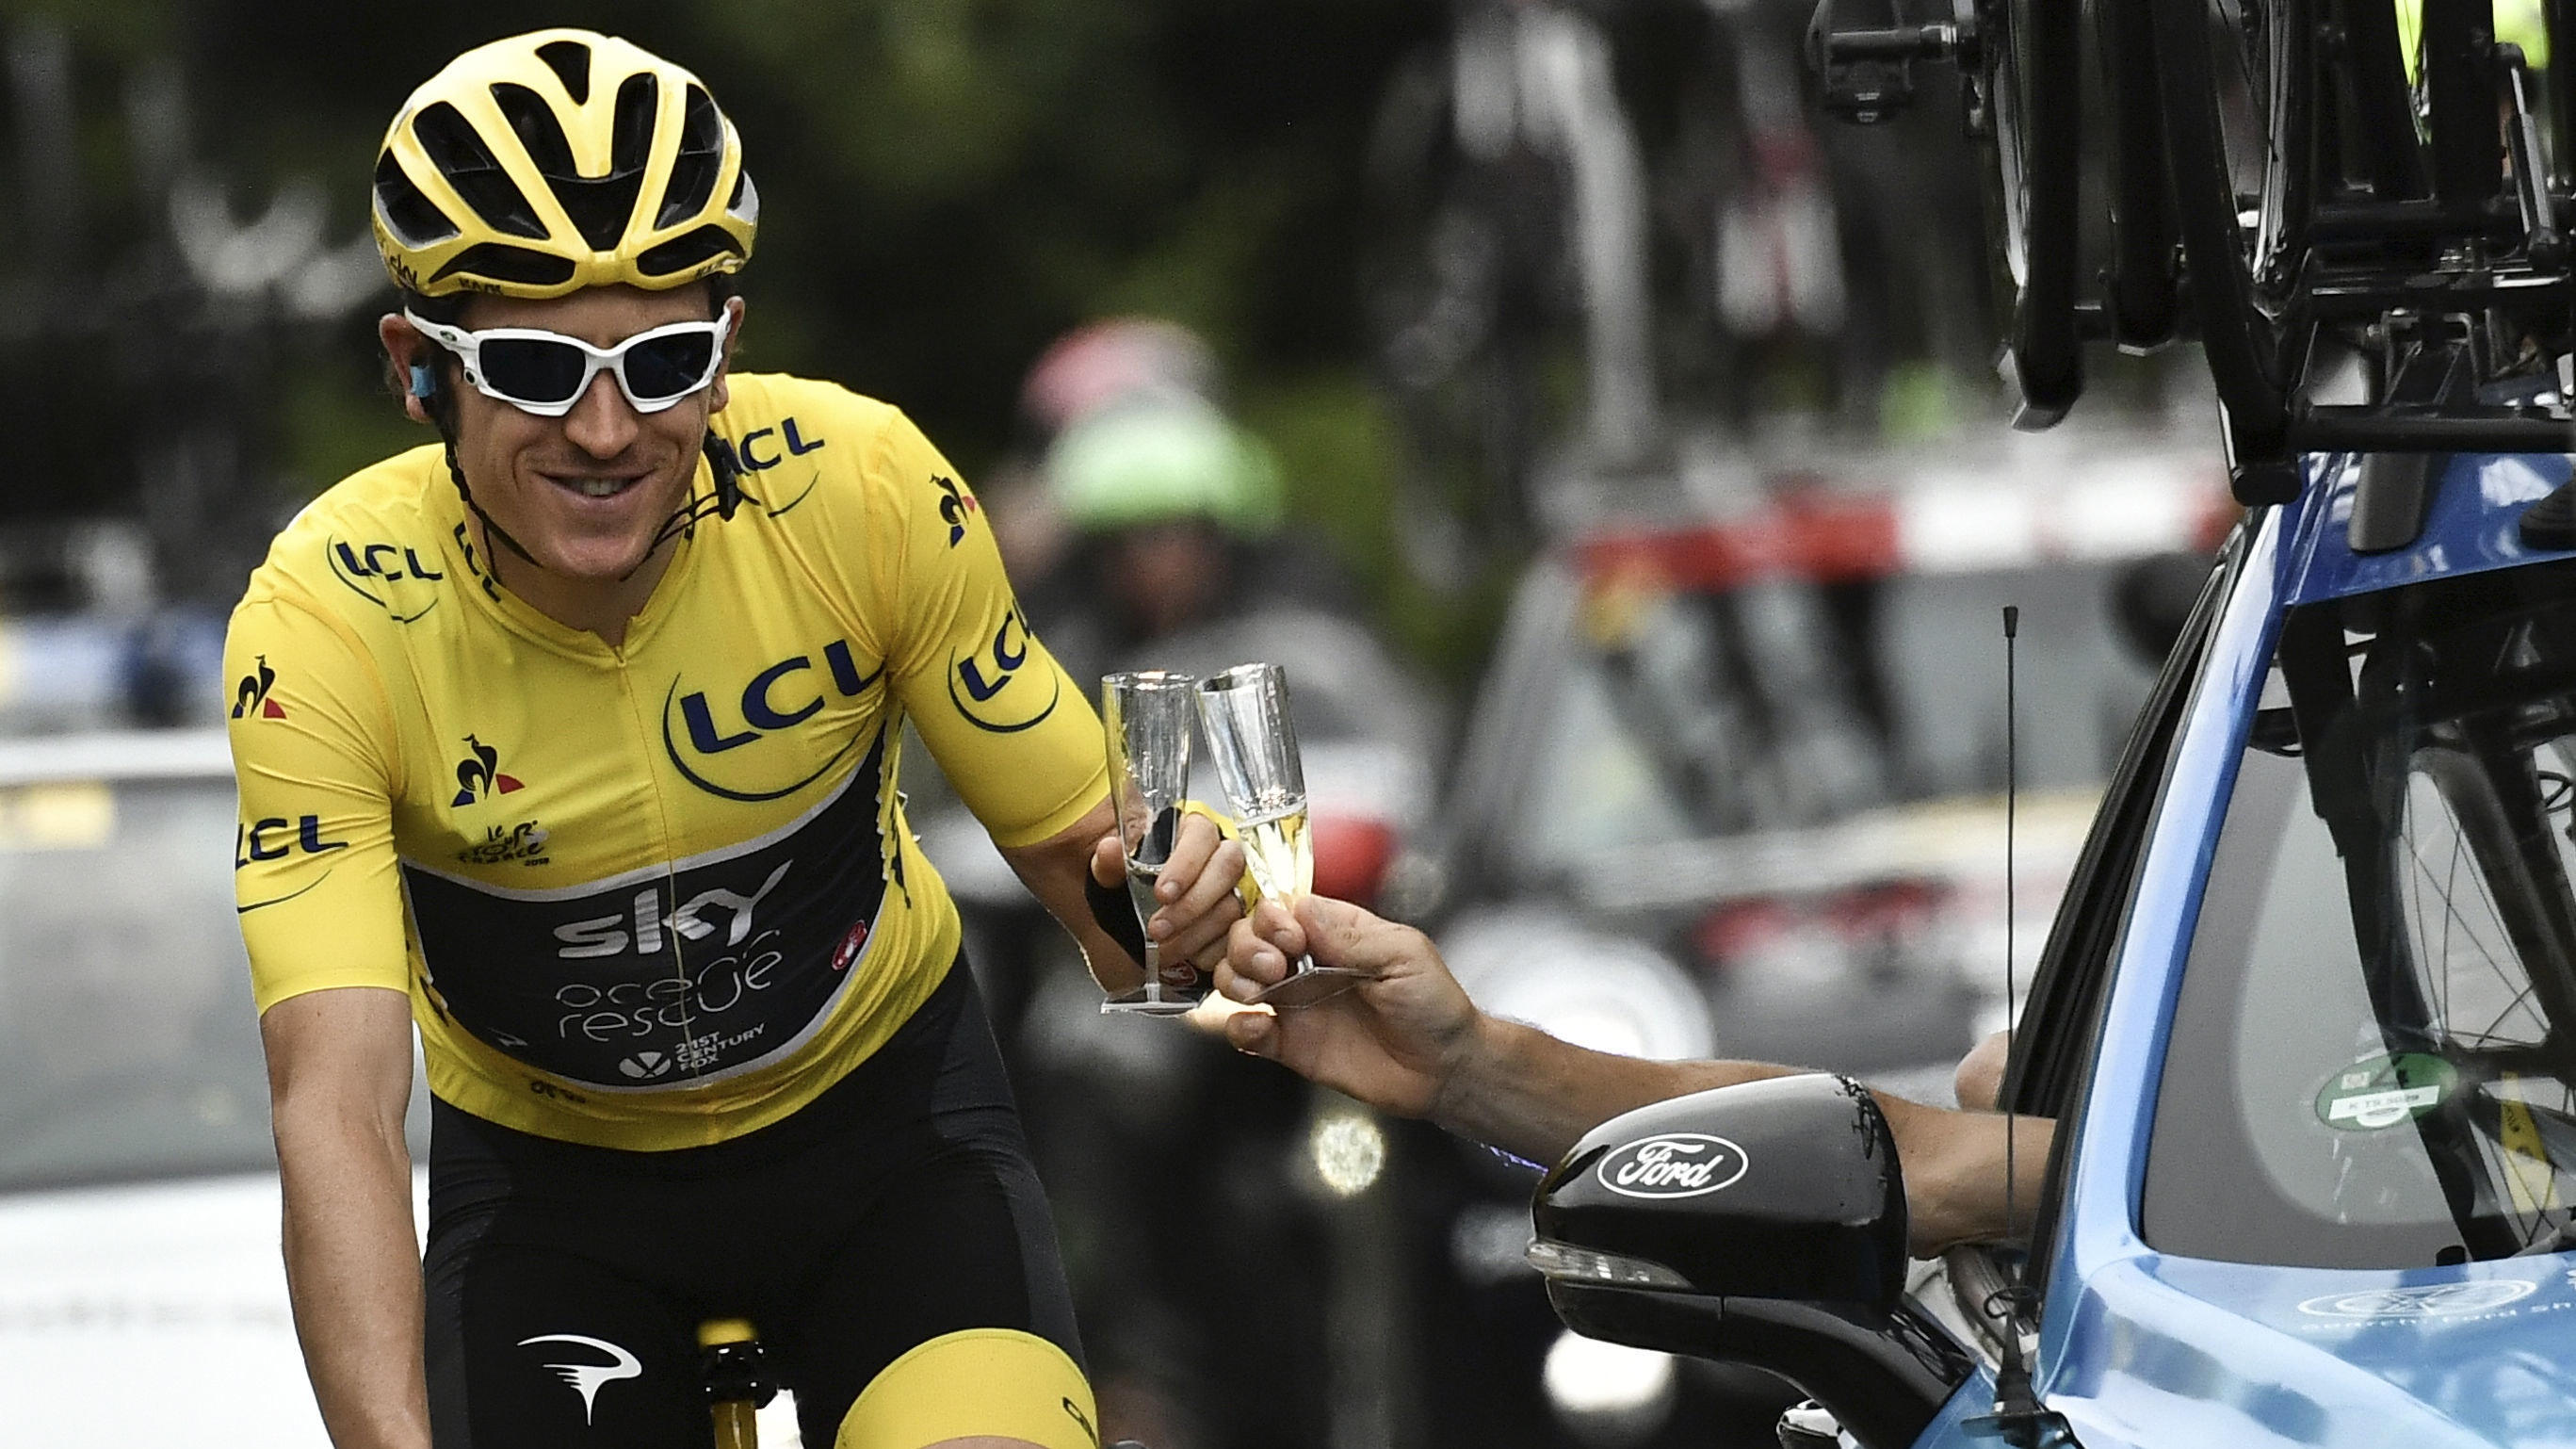 Thomas enjoys the champagne feeling of being a Tour de France winner BT